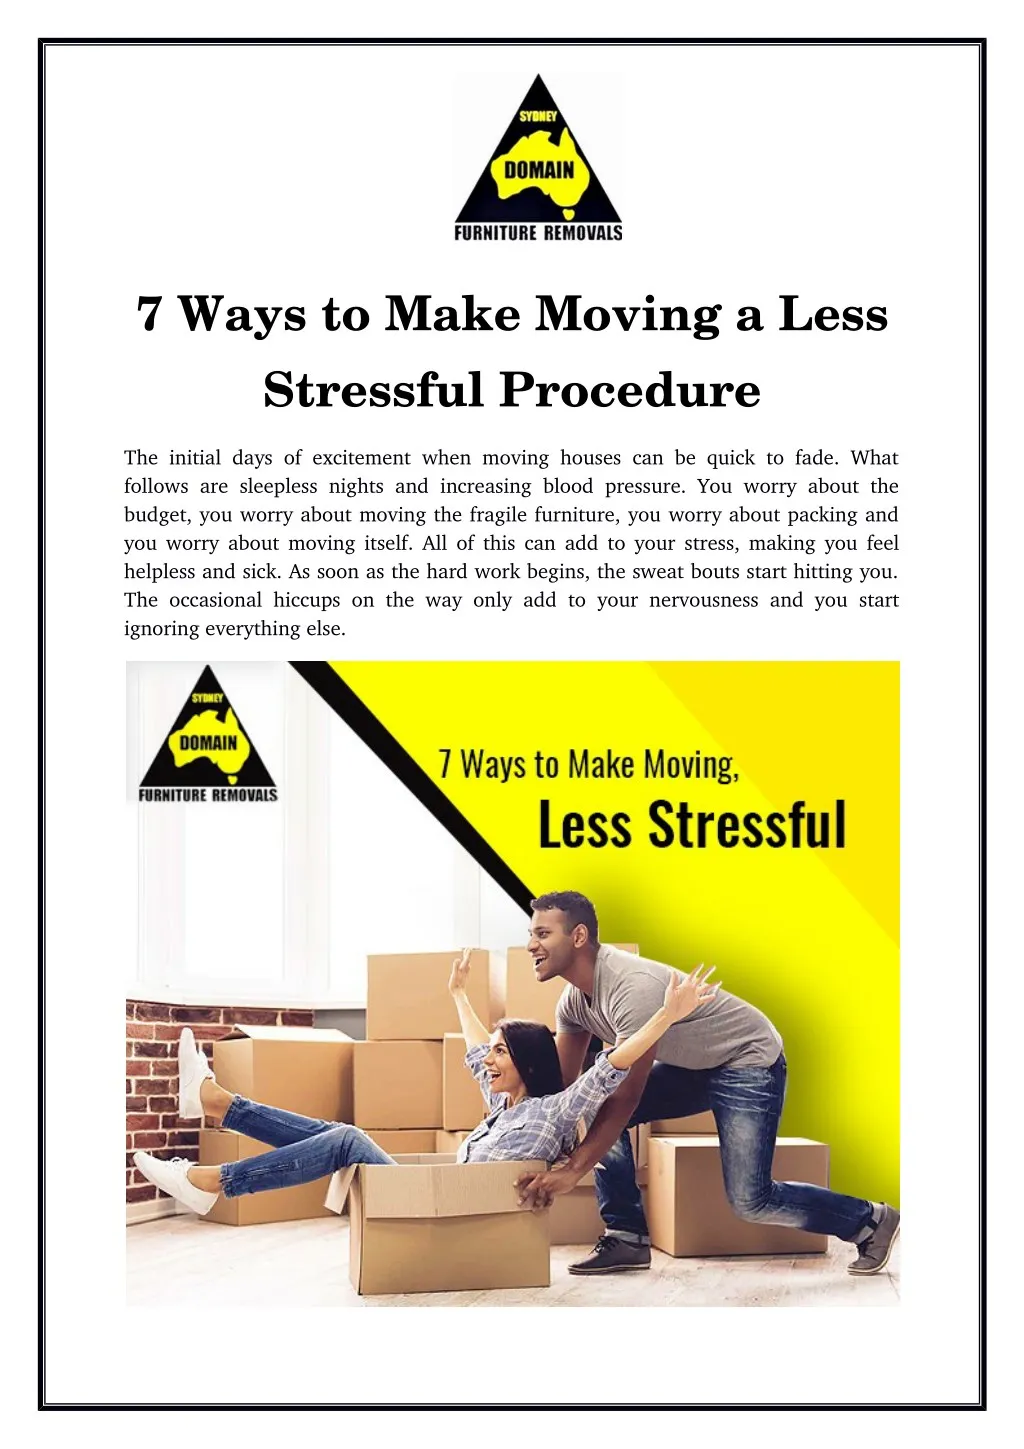 7 ways to make moving a less stressful procedure